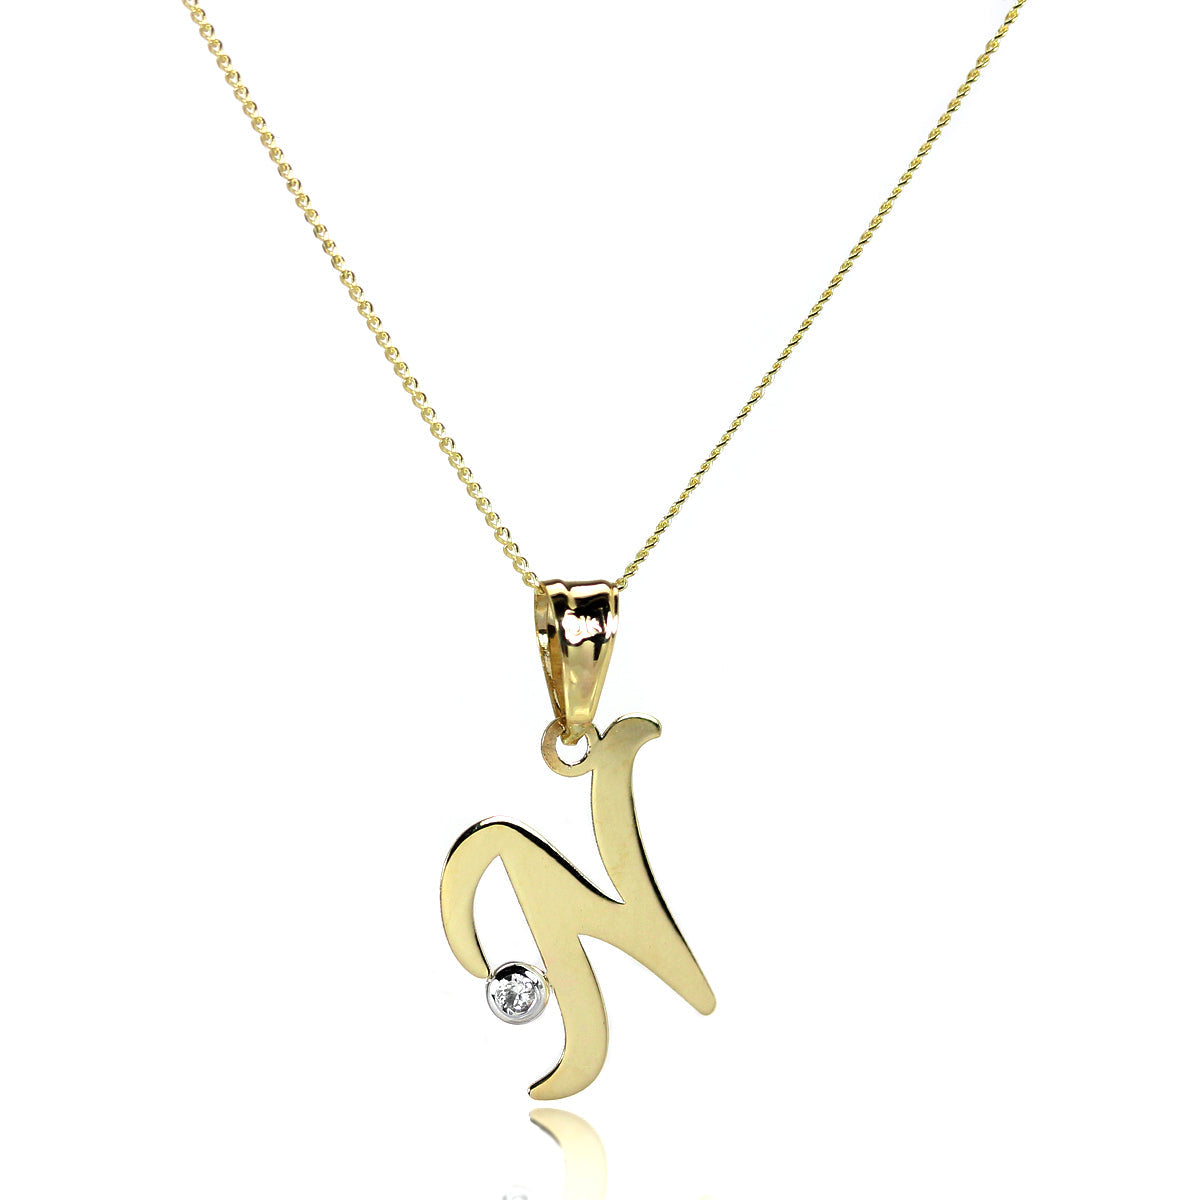 Light 9ct Gold Letter Pendant with CZ Crystal